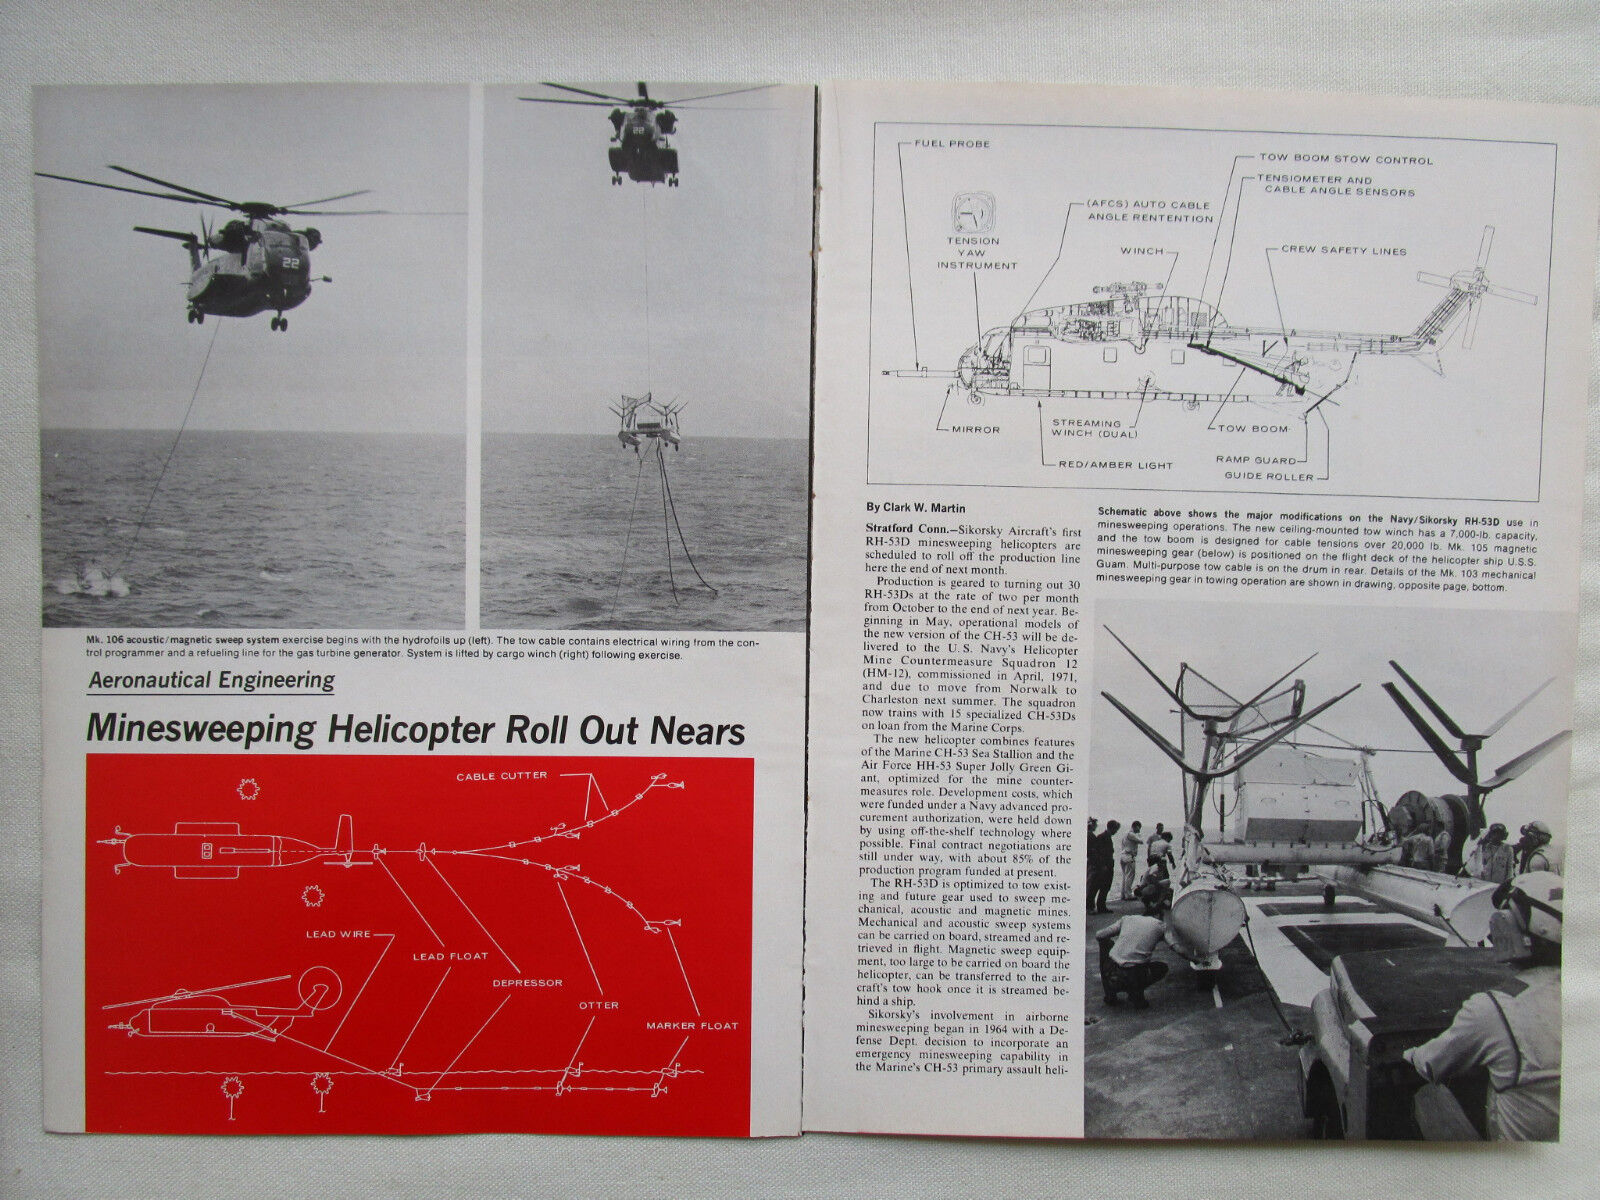 9/1972 ARTICLE 6 PAGES NAVY HELICOPTER HM-12 SIKORSKY CH-53D HYDROFOIL MINE F-15